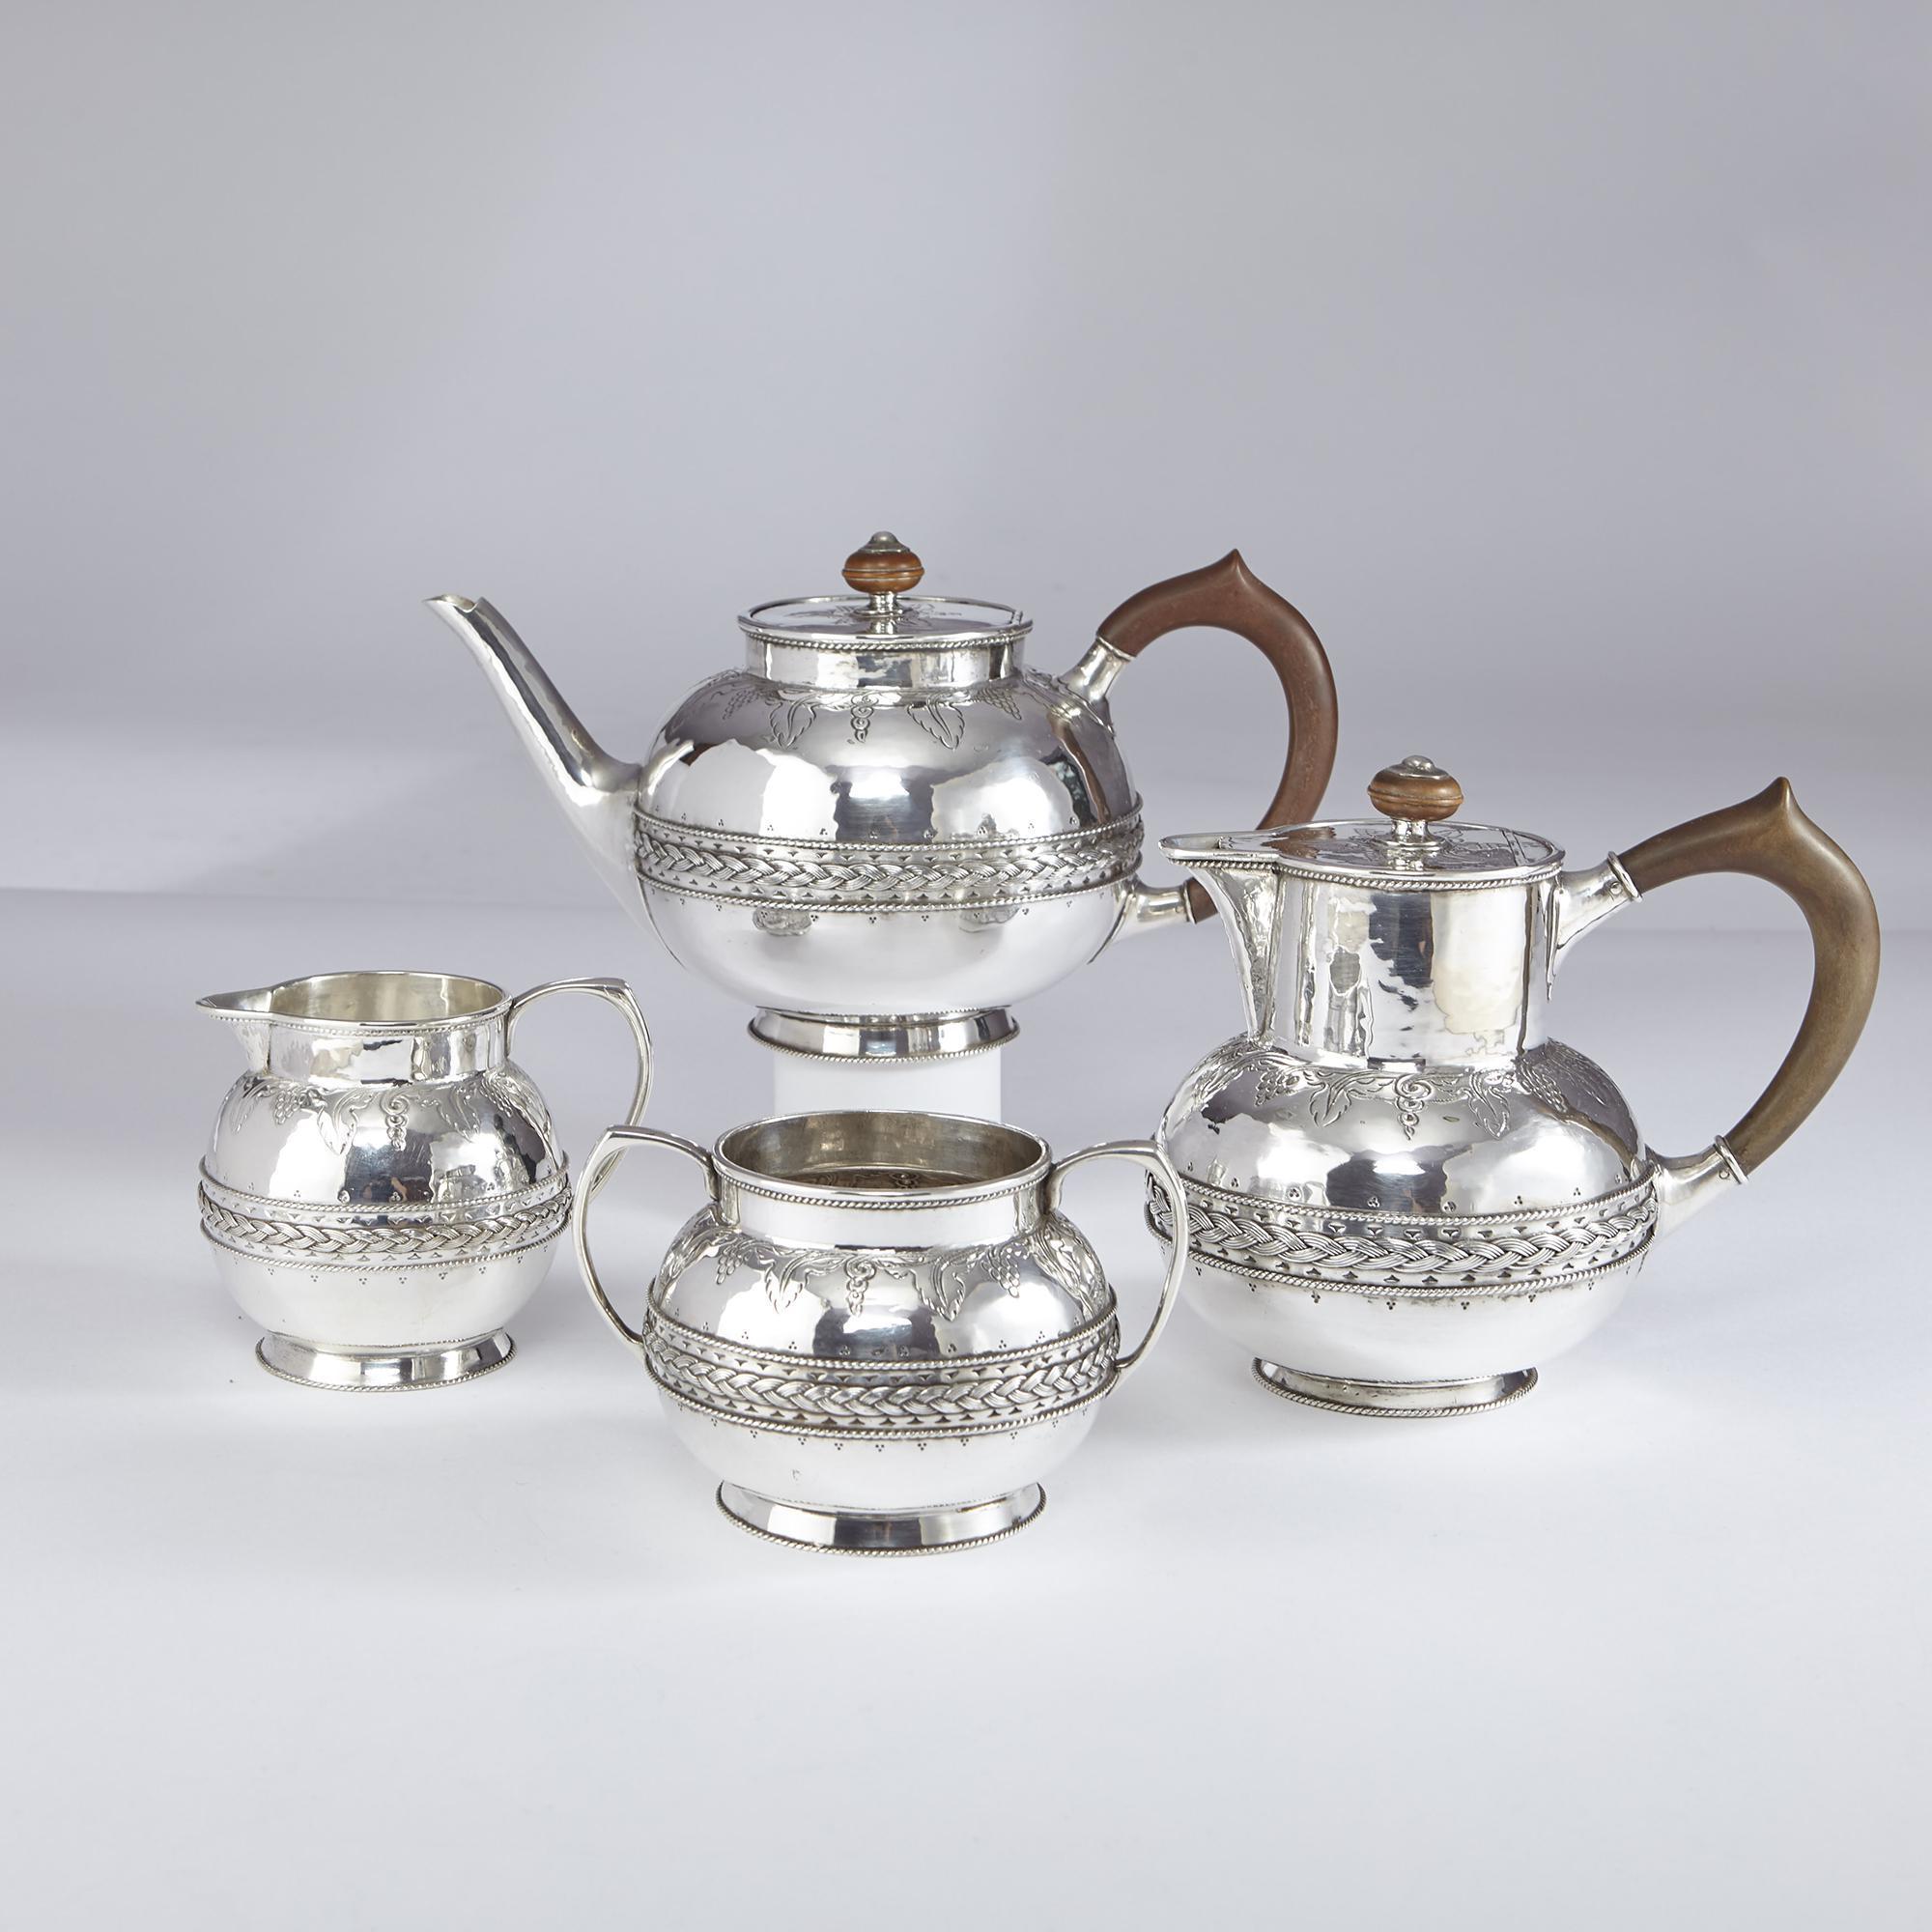 A hand-raised and hand-chased four-piece silver tea set, comprising a teapot, hot water jug, sugar bowl and milk jug. Each piece reflects its Arts & Crafts heritage with finely detailed cast and applied girdles of woven wirework patterns set against